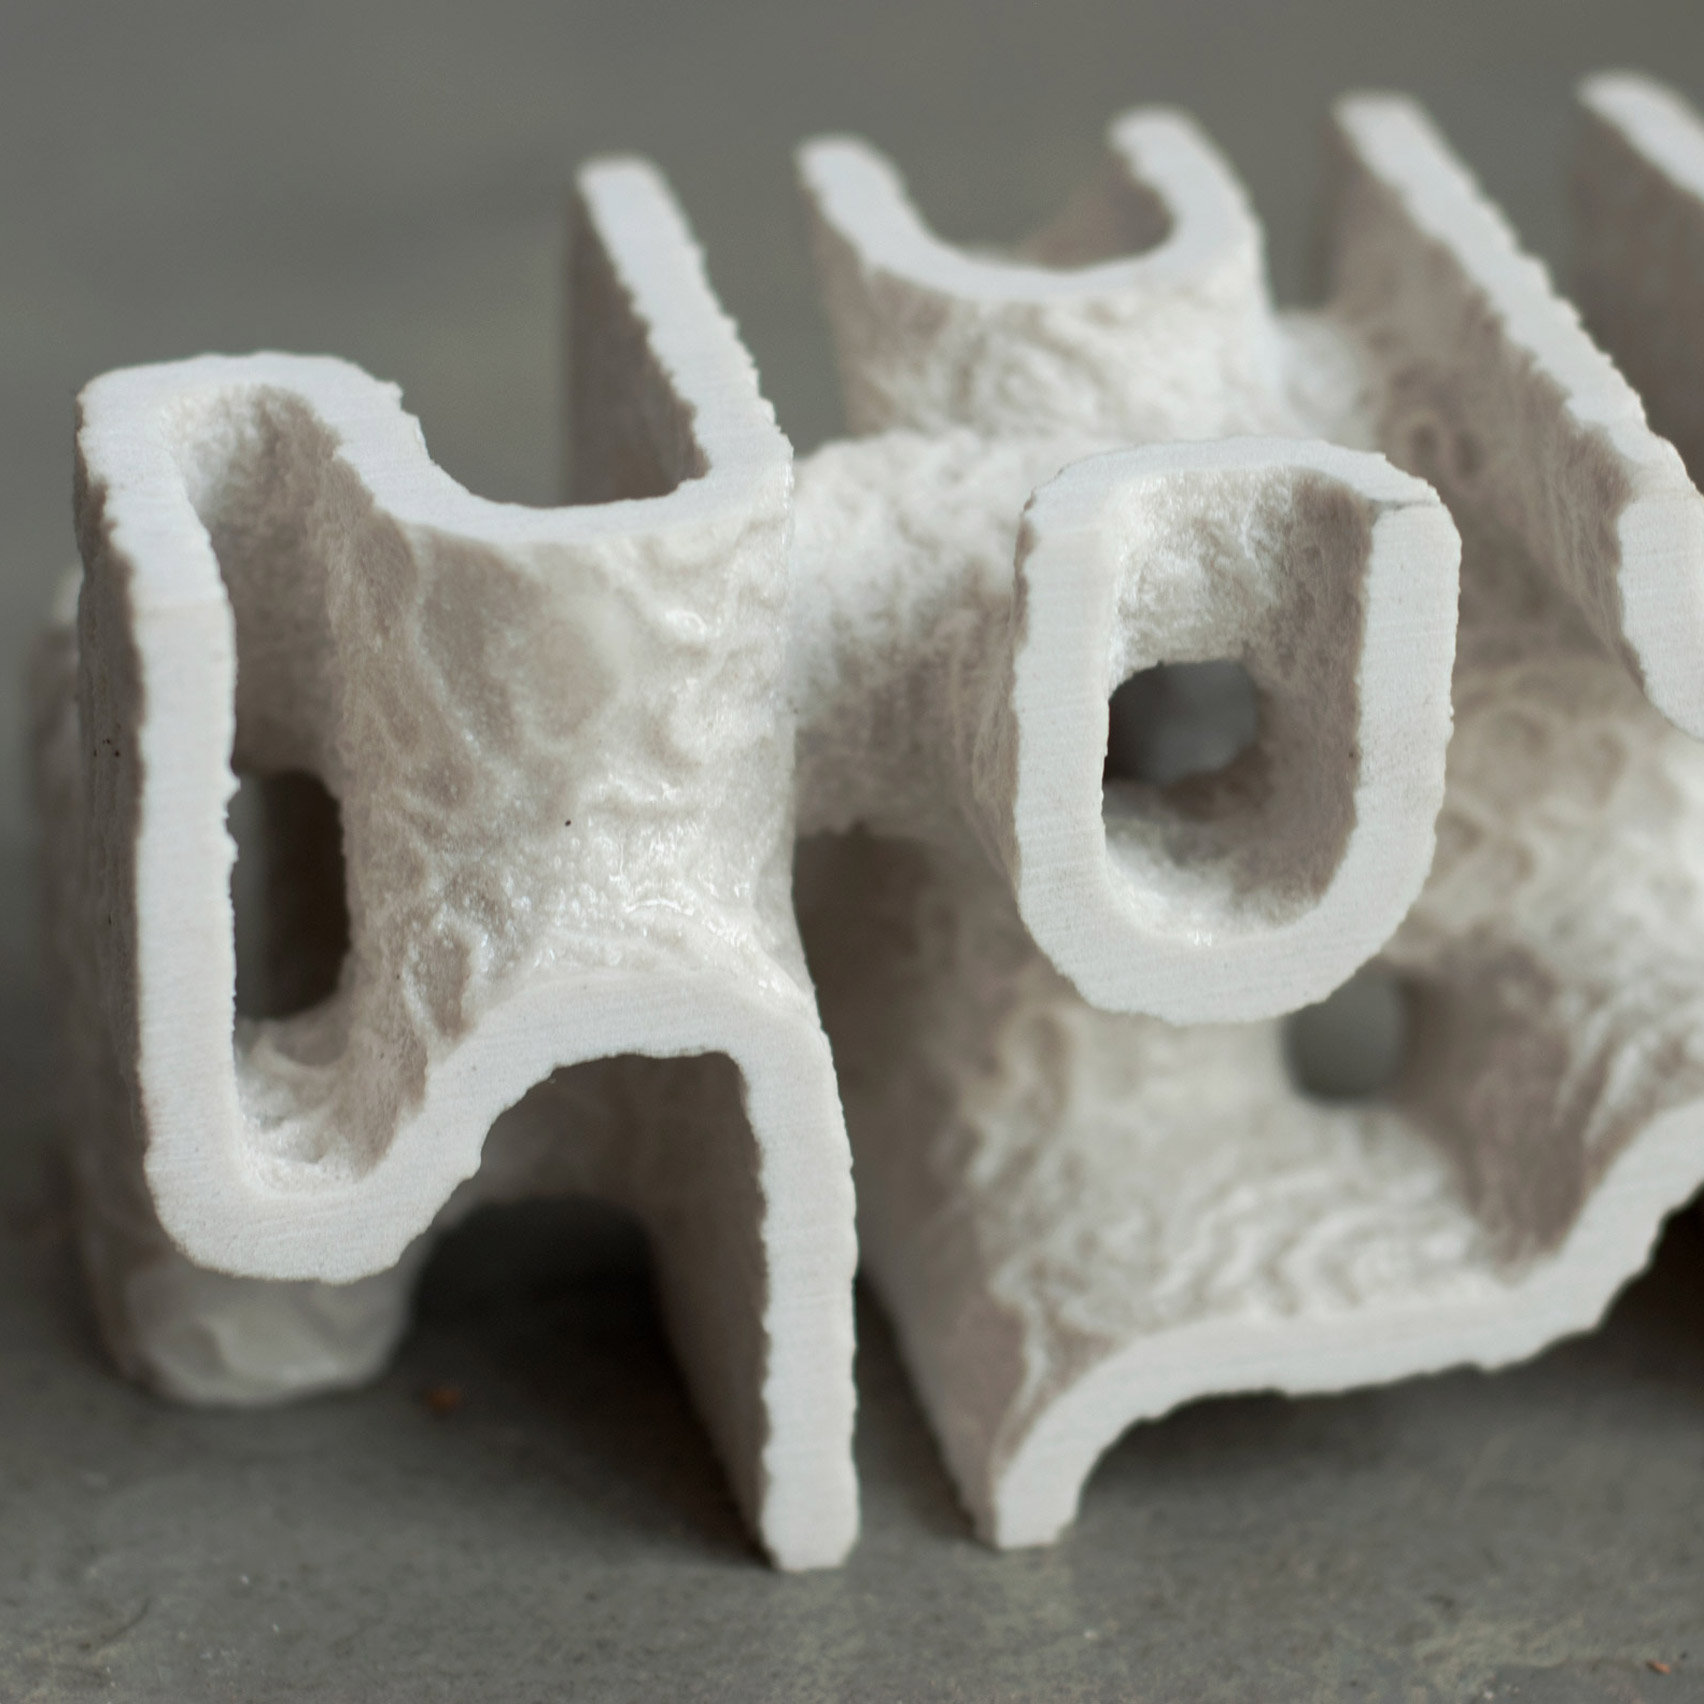 Coral reef skeletons crafted from 3D-printed calcium carbonate